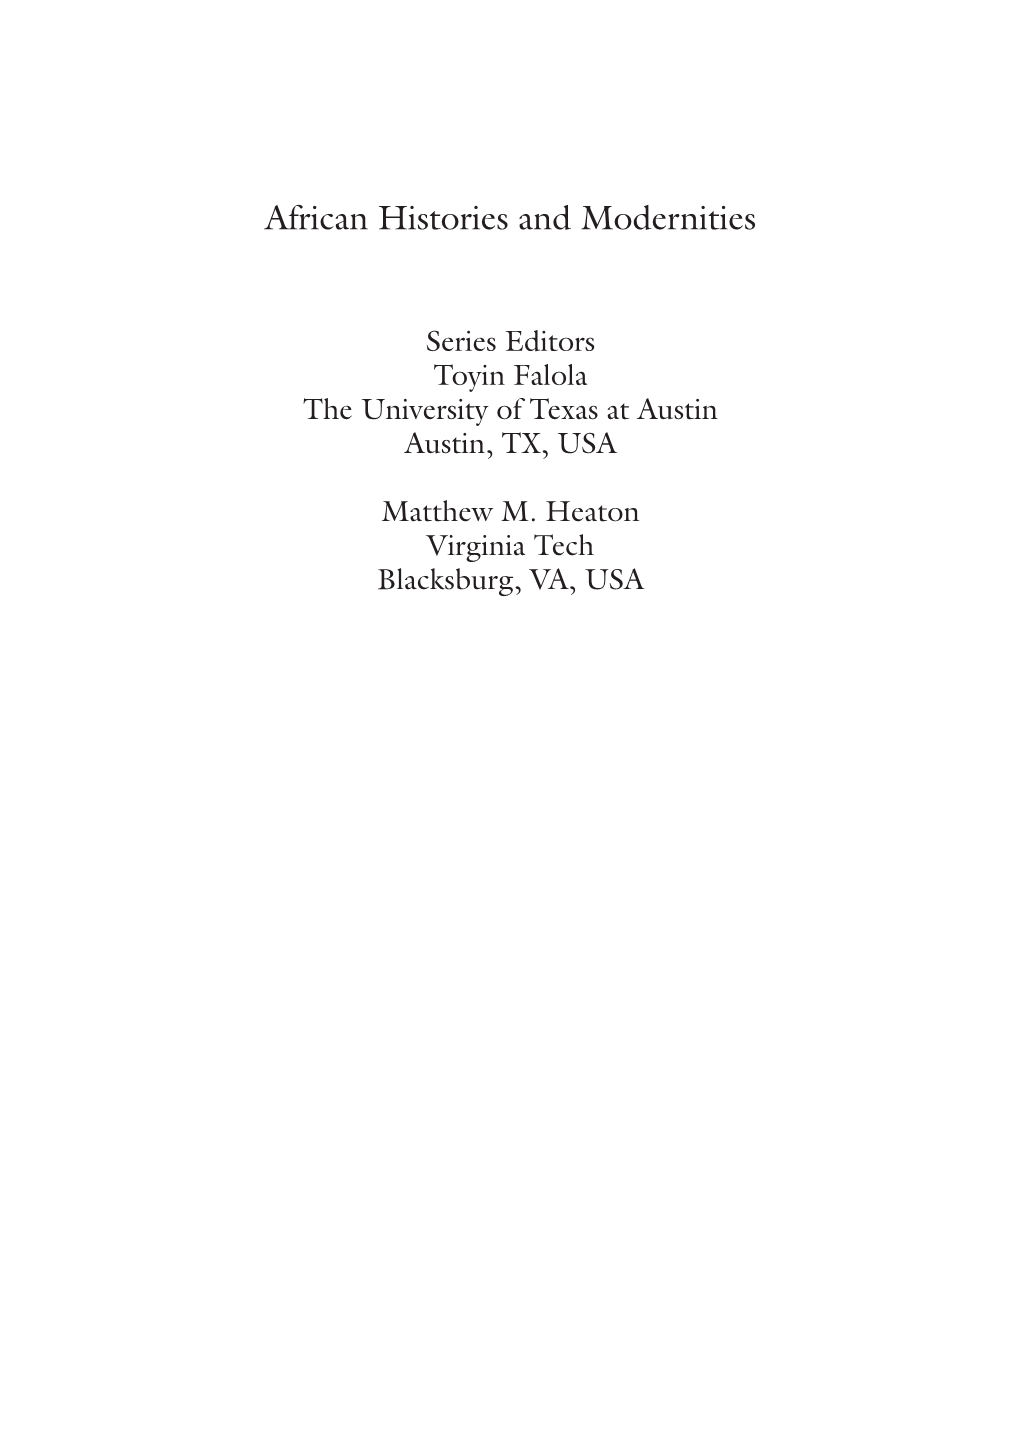 African Histories and Modernities